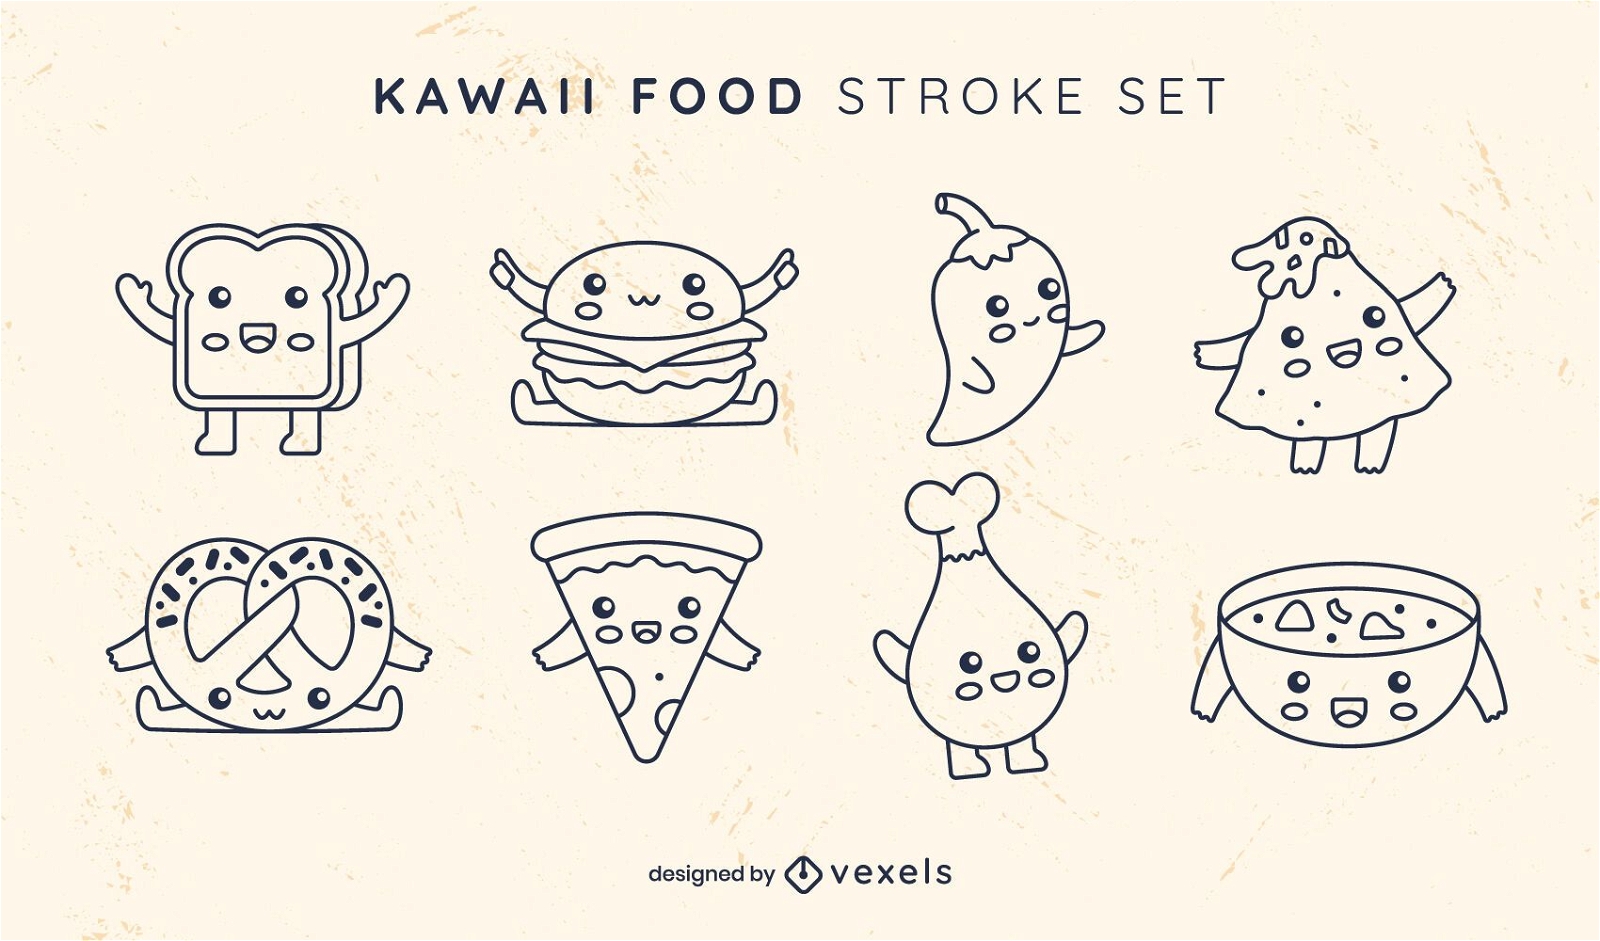 Fast Junk Food Icons Set | Easy doodle art, Simple doodles, Food icons